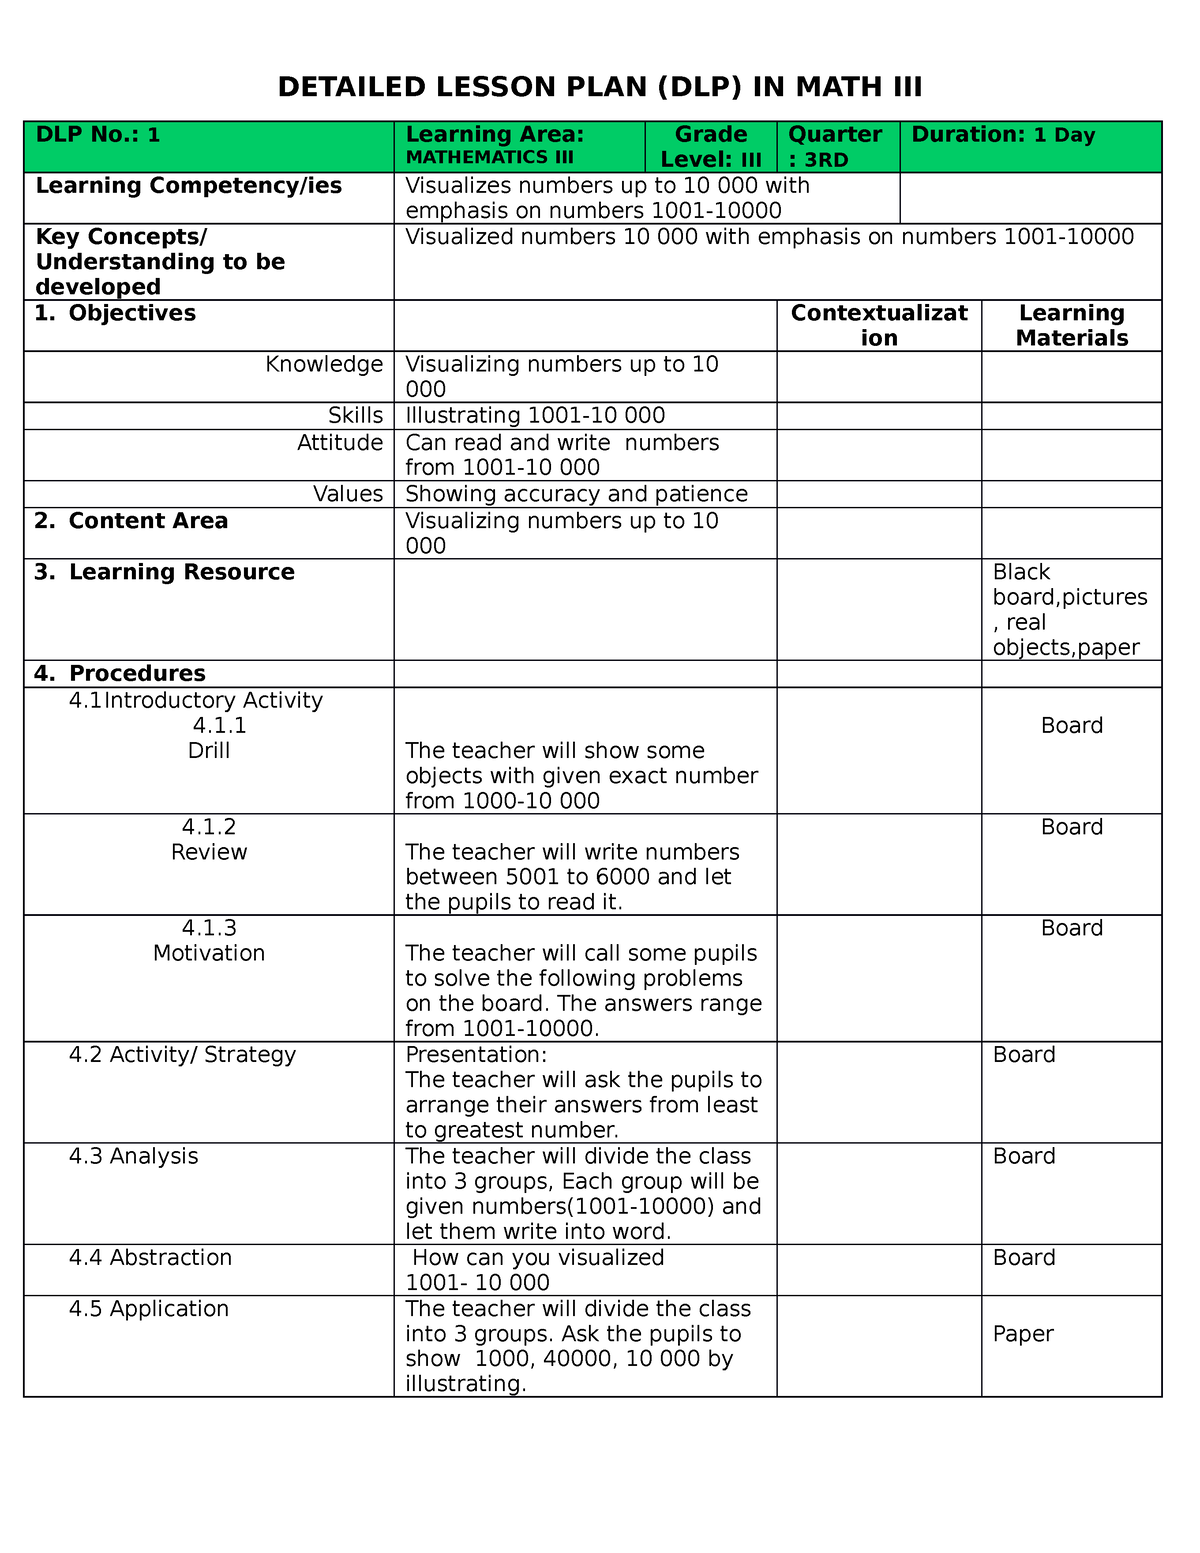 Dlp Math Iii Day1 Lesson Plan Detailed Lesson Plan Dlp In Math Iii Dlp No 1 Learning 3632